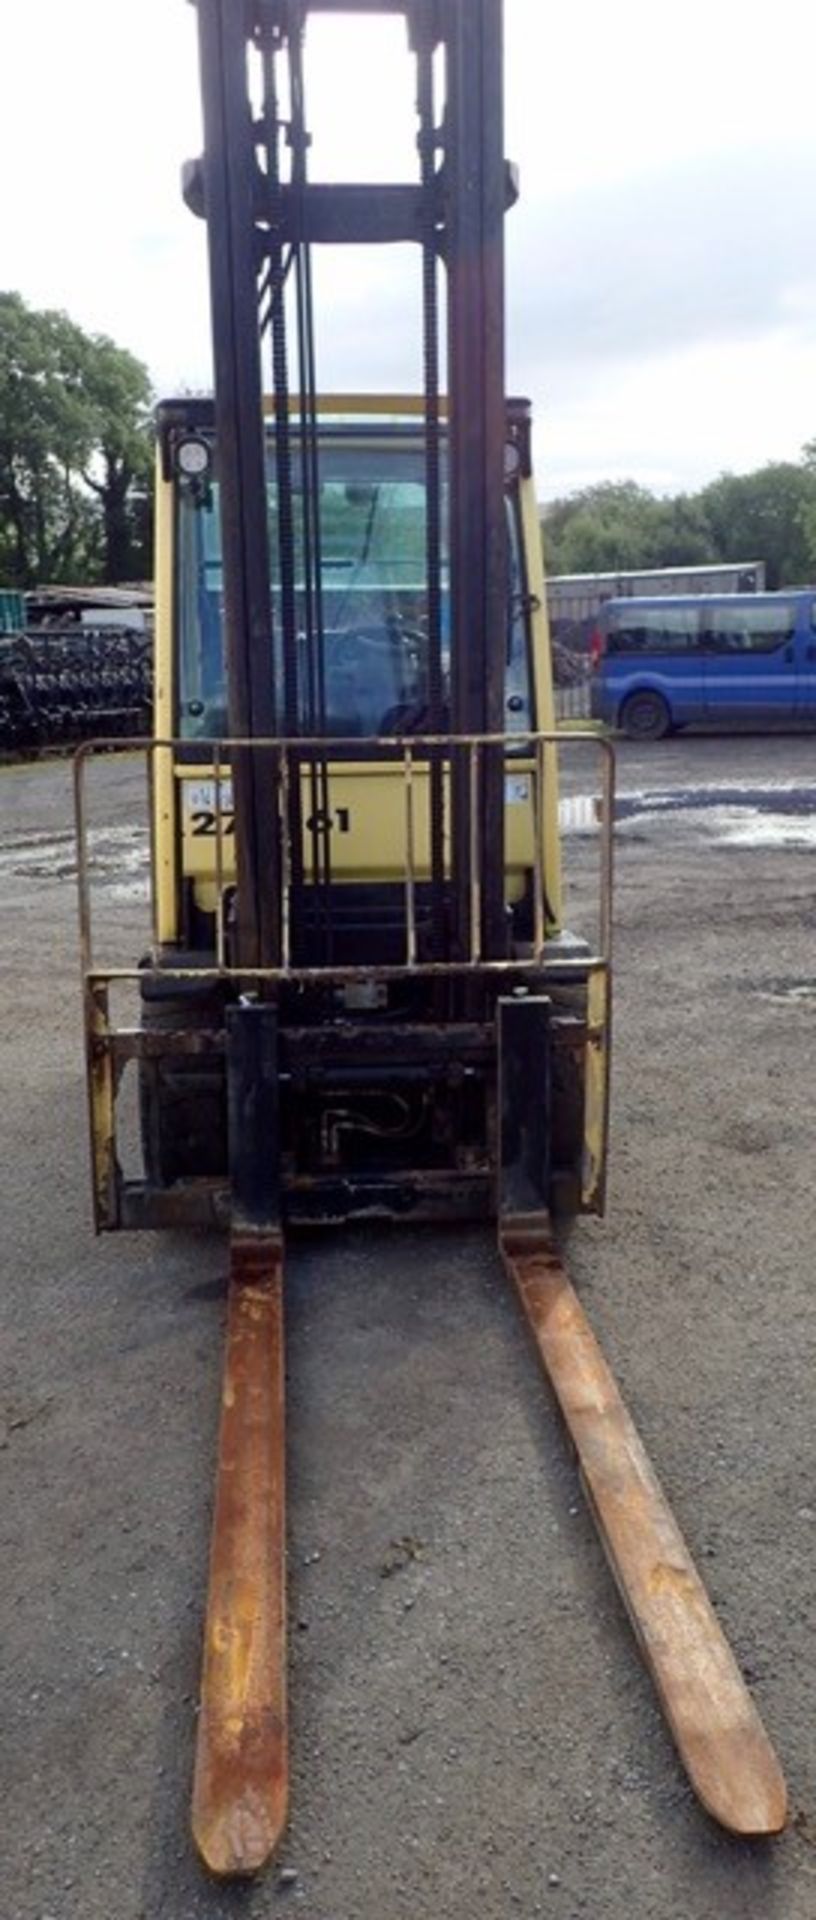 Hyster H3.5 3.5 tonne diesel driven fork lift truck Year: 2012 S/N: L177B37532K Recorded Hours: - Image 6 of 11